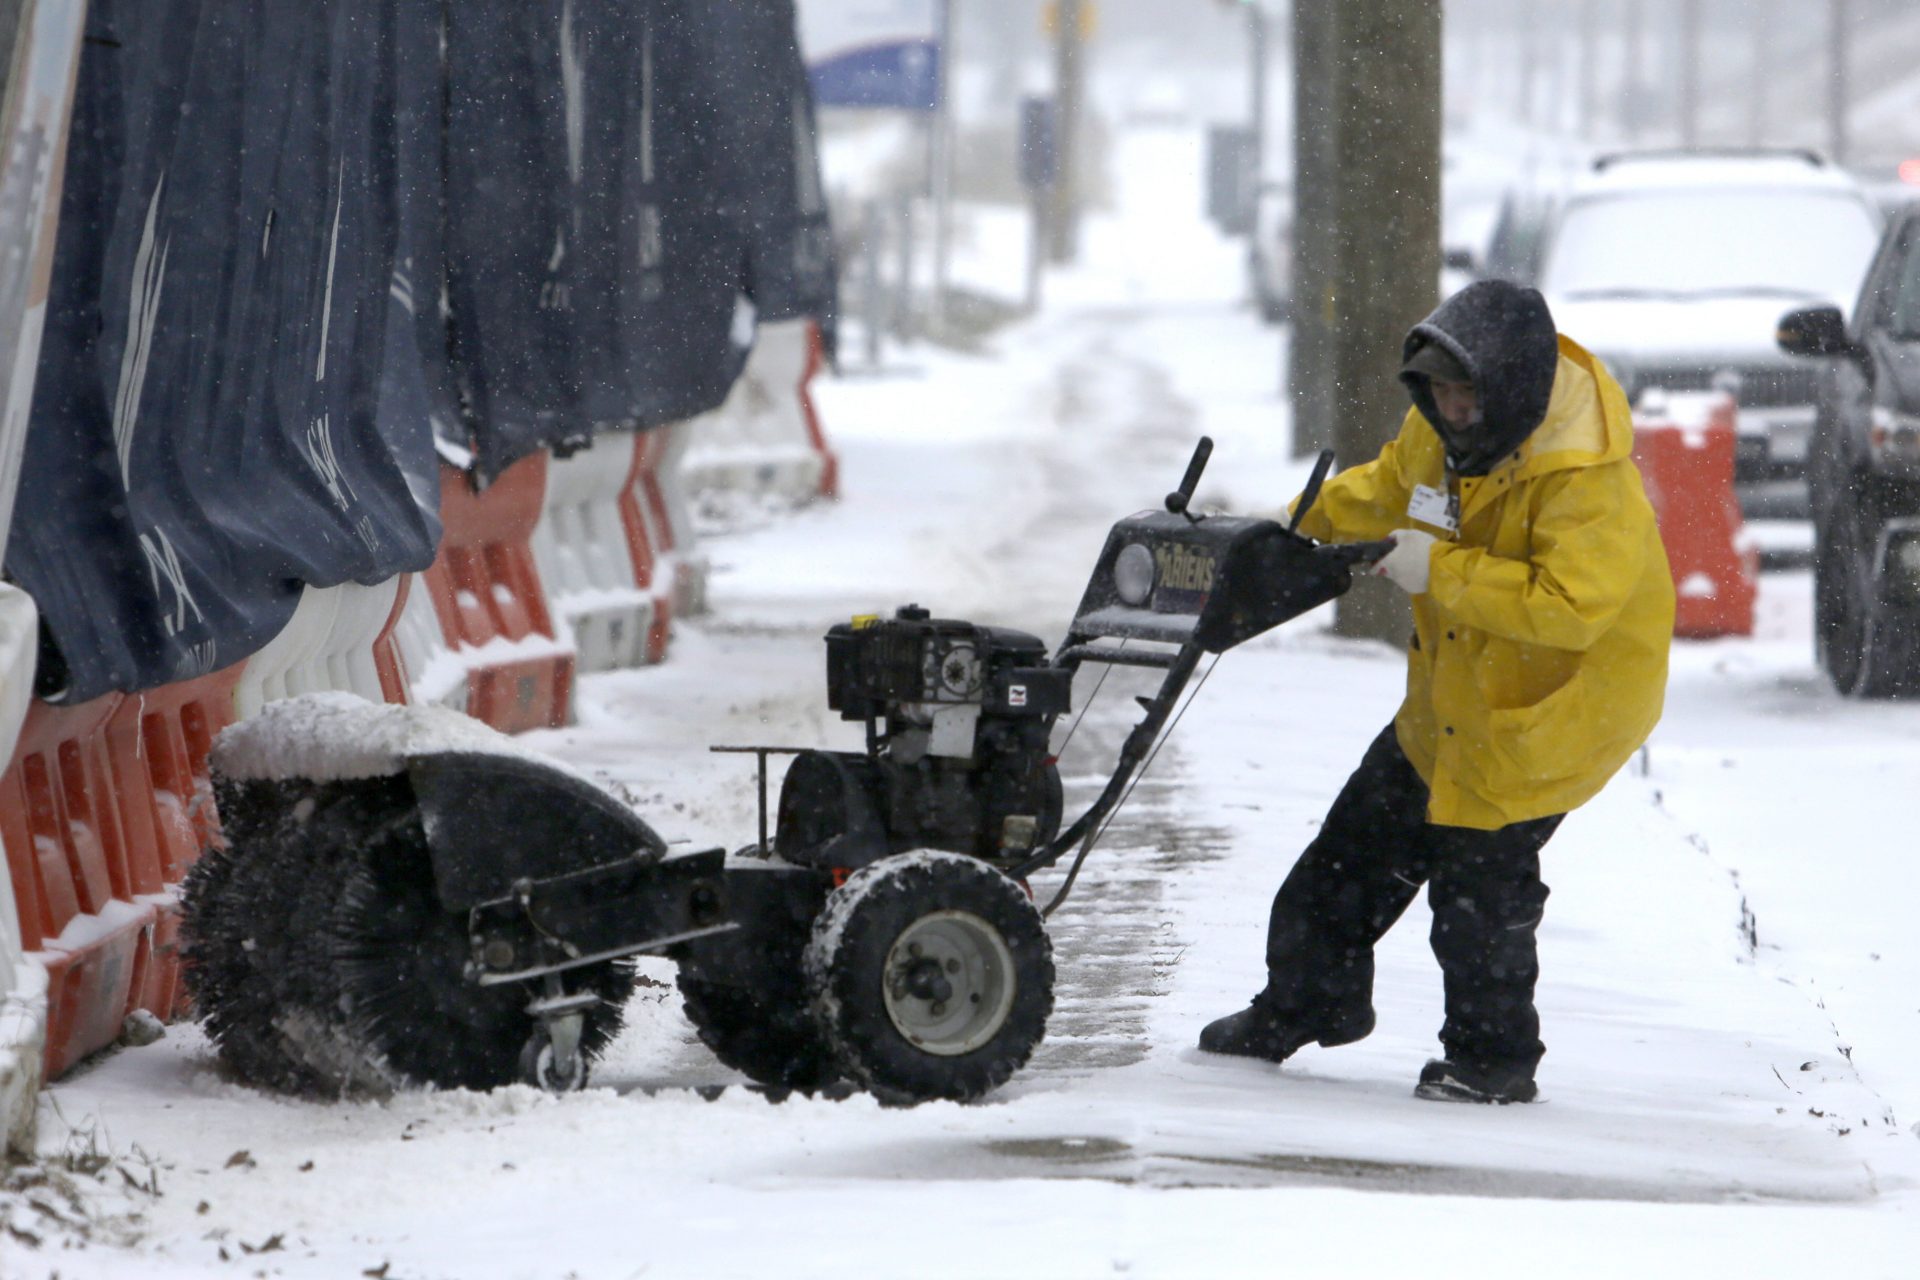 A man works to turn his snow-clearing machine Sunday Jan. 31, 2021 in Philadelphia.